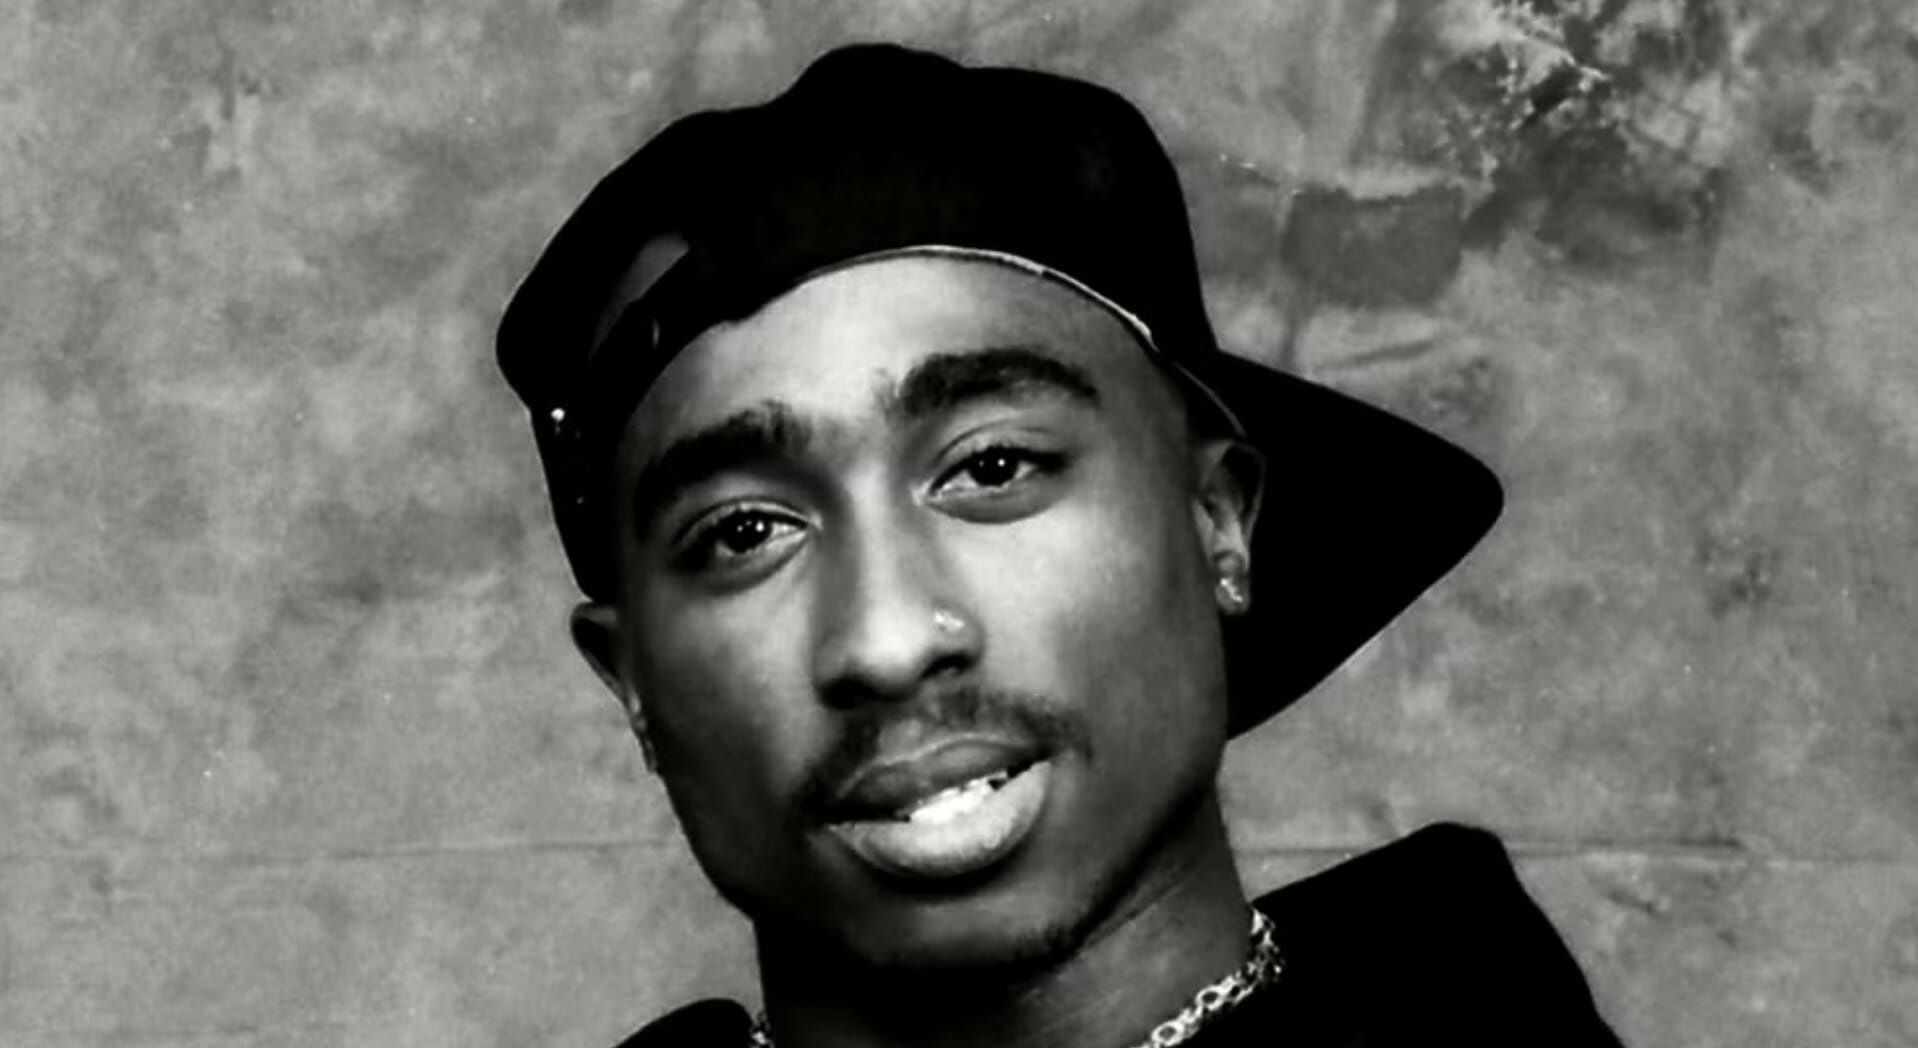 Las Vegas Resident Arrested in Connection with Tupac Shakur’s 1996 Murder